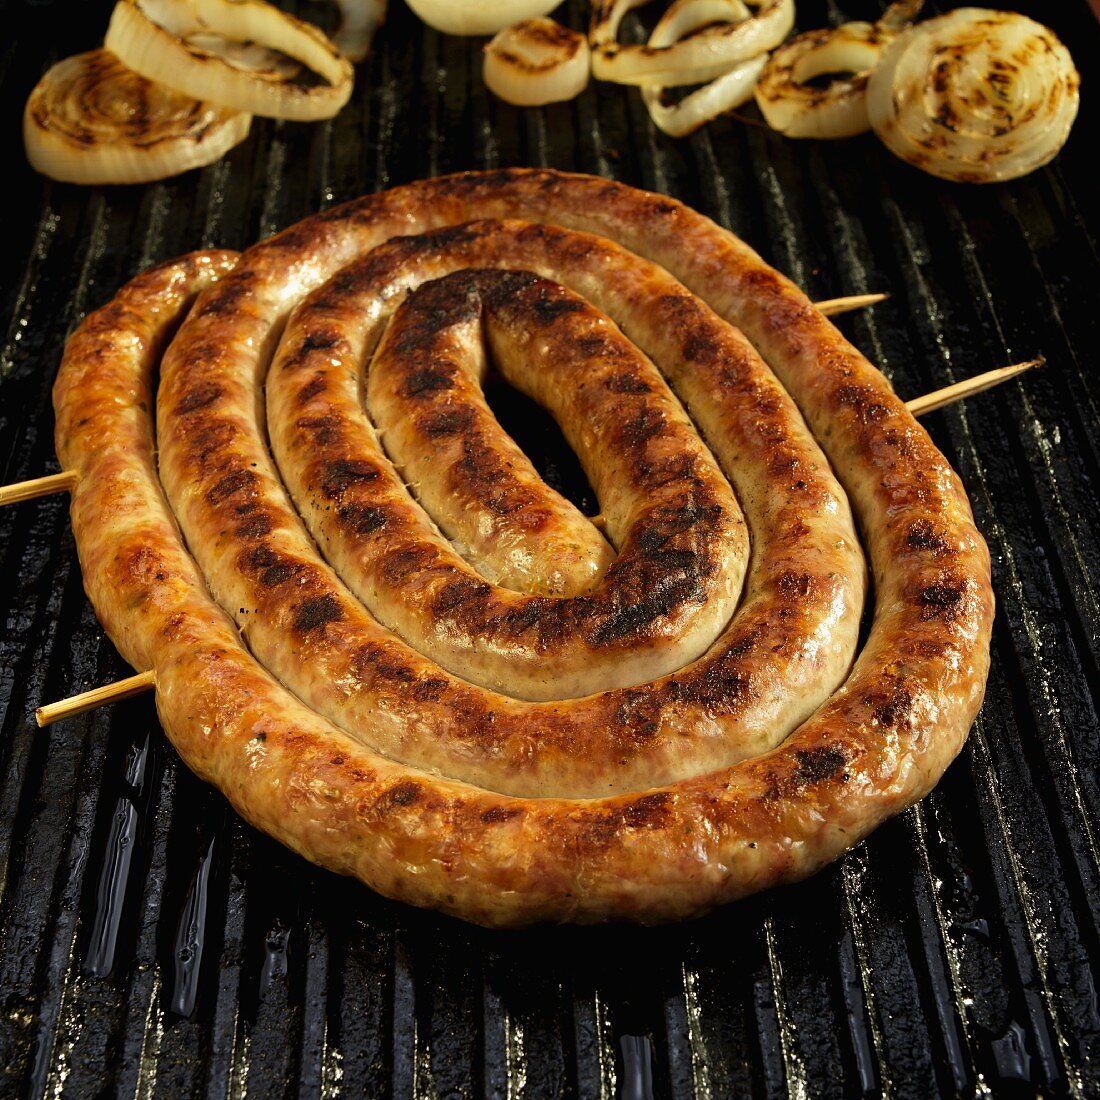 Coil of Italian Sausage on Grill with Onions